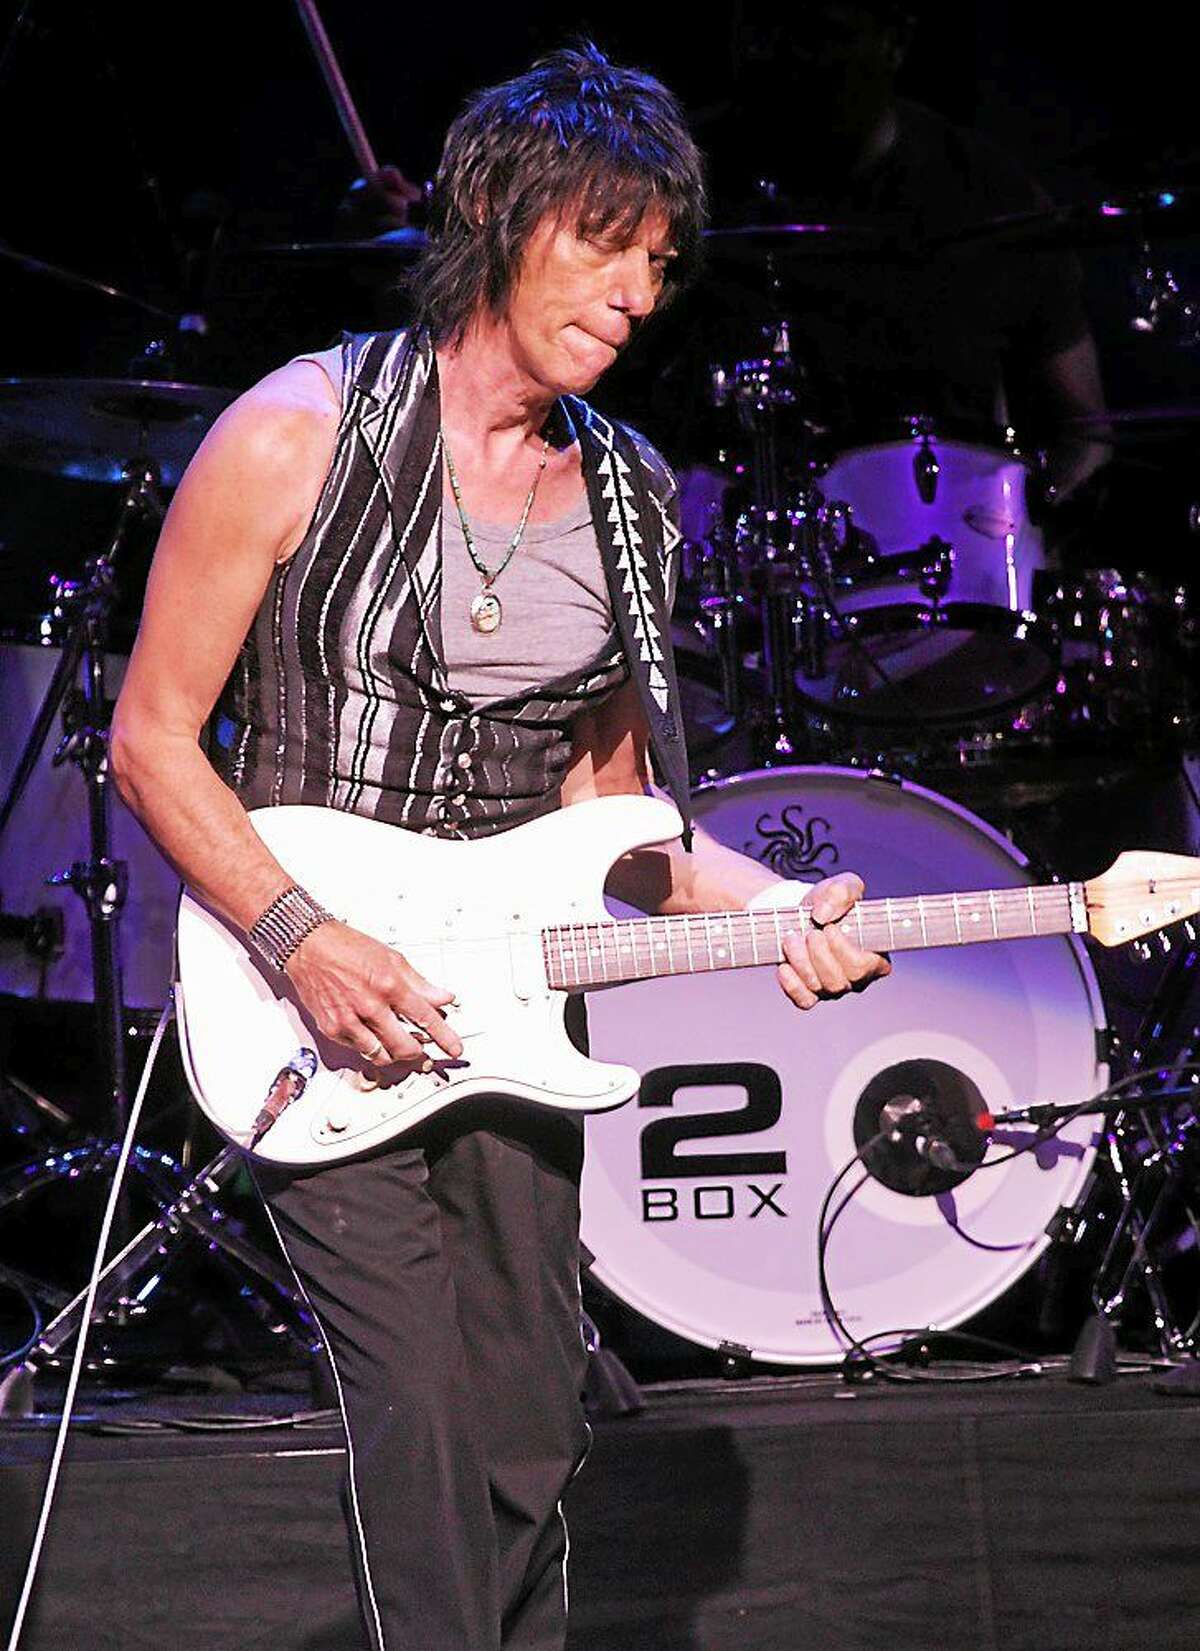 Photo by John Atashian Rock guitarist extraordinaire Jeff Beck is shown performing on stage during his concert in the Grand Theater at the Foxwoods Resort & Casino, Aug. 31. Beck is one of the three guitarists to have played with The Yardbirds, the other two being Eric Clapton and Jimmy Page. Beck and his band are releasing a new studio cd later this year. The new, still-unnamed release will be Beckís first studio album since 2010's successful ìEmotion & Commotionî, which peaked just outside the Top 10 on Billboardís albums chart.